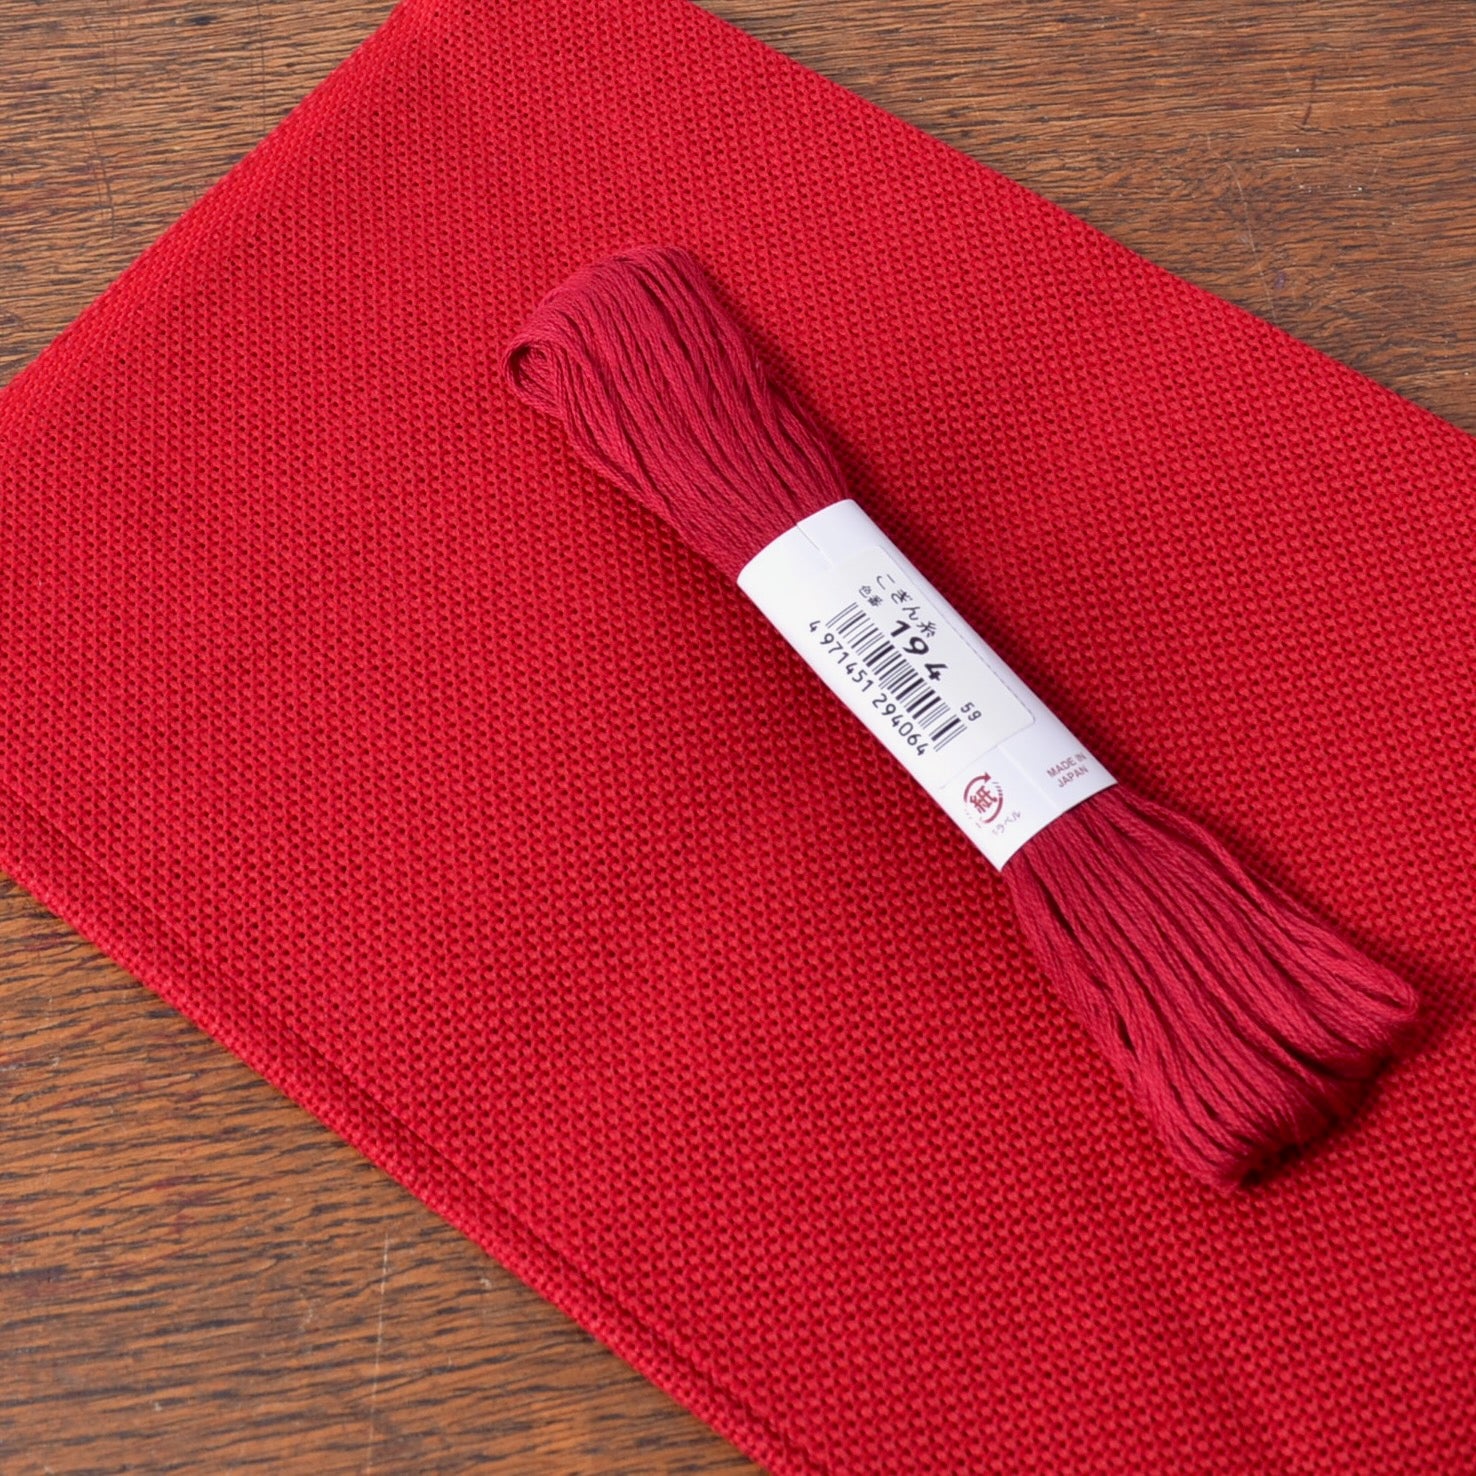 Kogin Stitching, 18 Count Red Congress Cloth shown with Red kogin thread